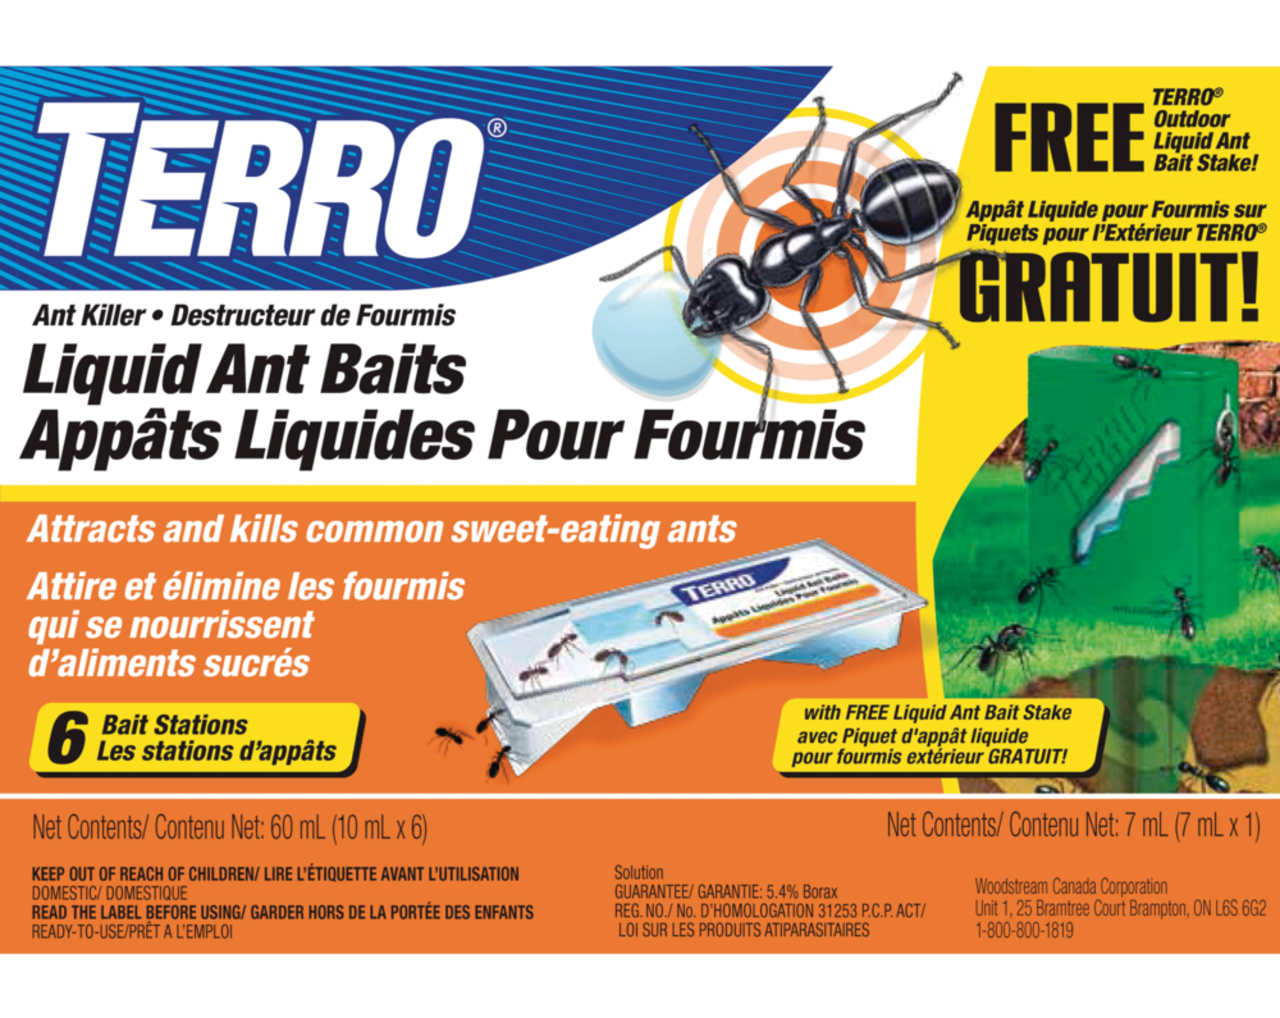 https://media-www.canadiantire.ca/product/seasonal-gardening/gardening/weed-insect-rodent-control/0598829/terro-pre-filled-liquid-ant-killer-6pk-9781db49-5906-4340-b834-6ff779710257.png?imdensity=1&imwidth=1244&impolicy=mZoom